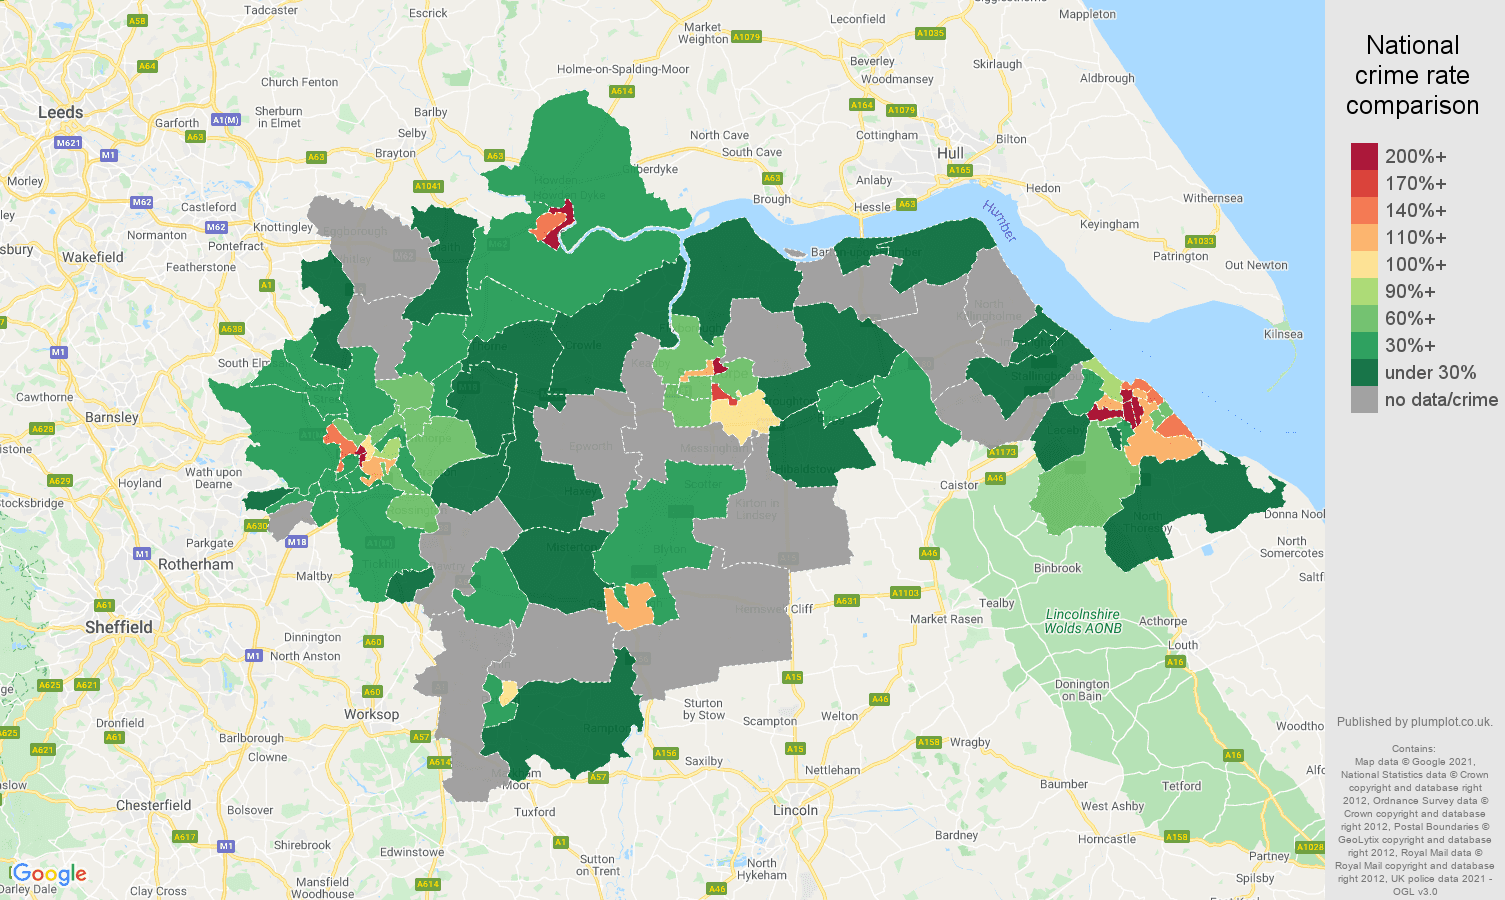 Doncaster bicycle theft crime rate comparison map